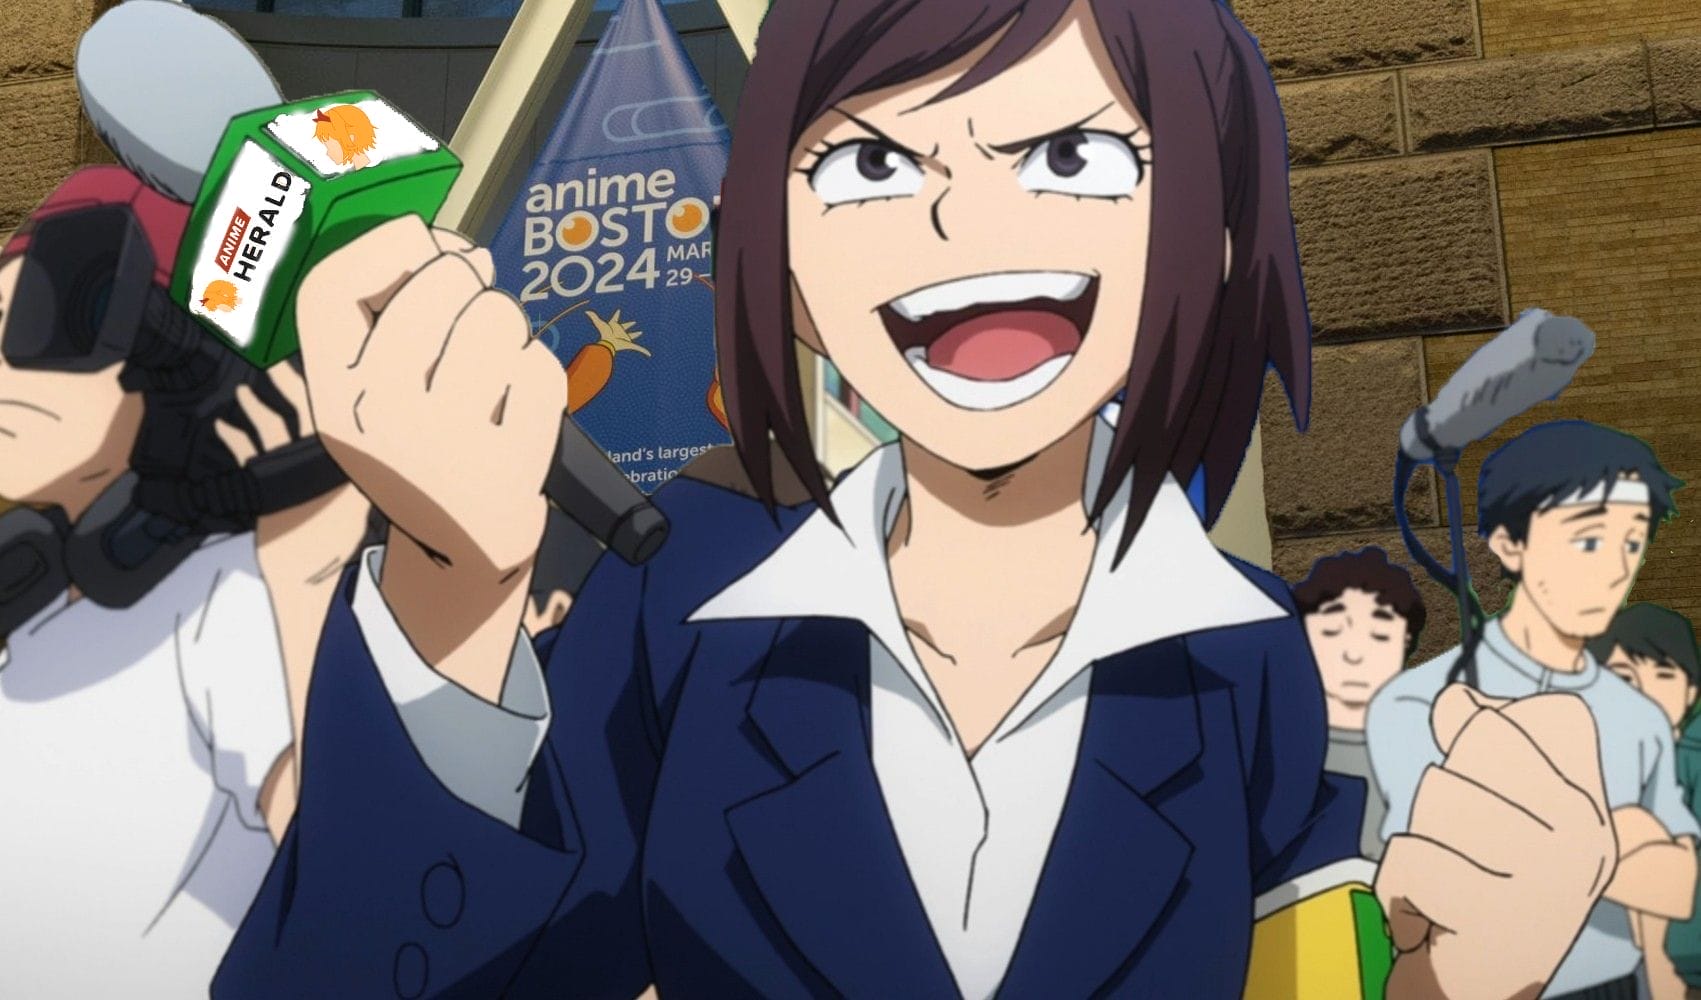 A spunky, smirking woman reporter from My Hero Academia holding a microphone with the Anime Herald logo as she stands in front of Anime Boston 2024.